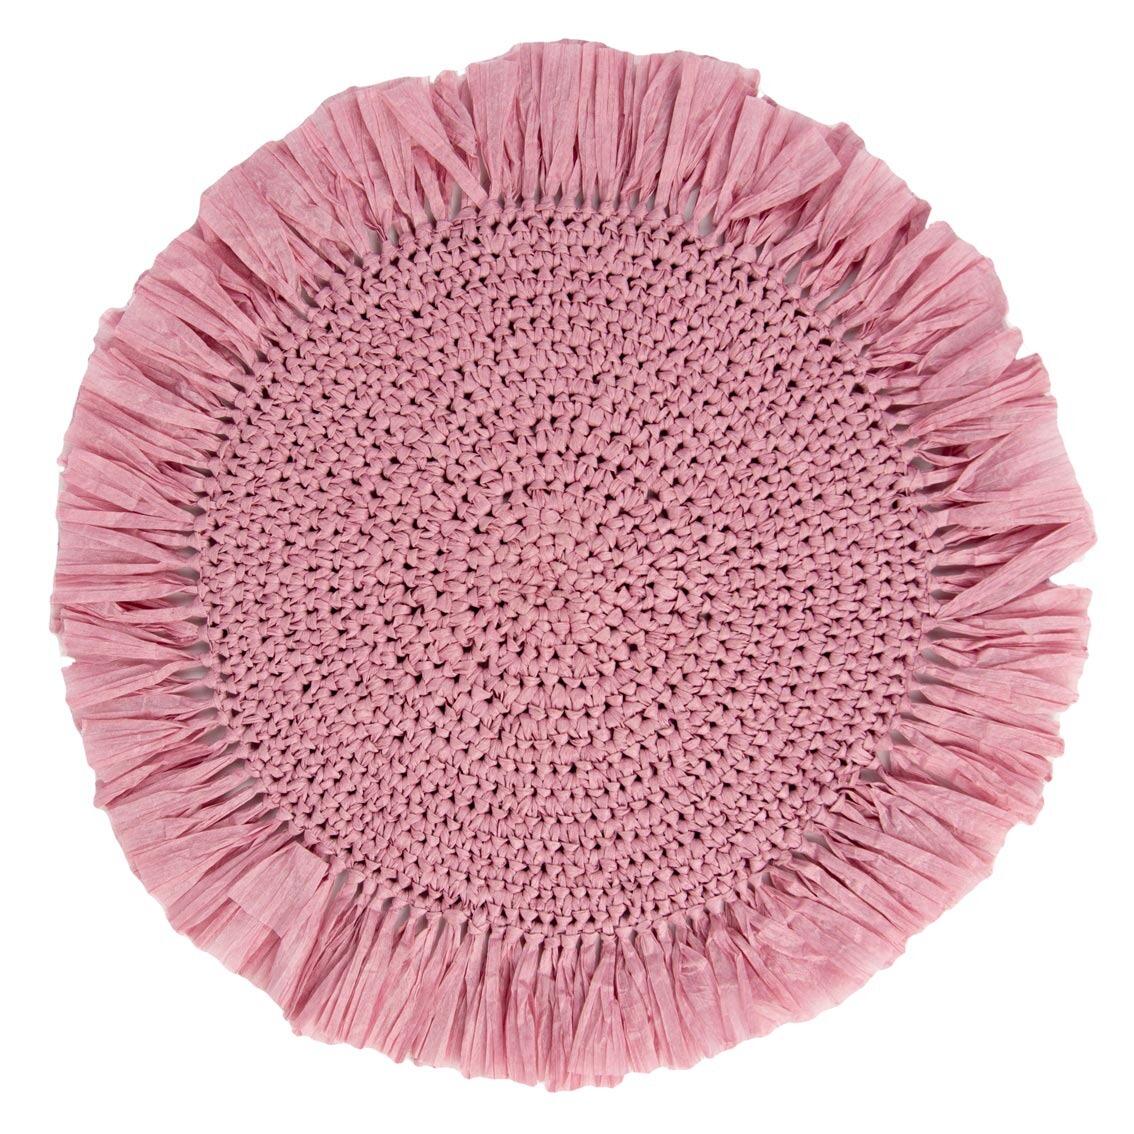 Handcrafted pink raffia placemat